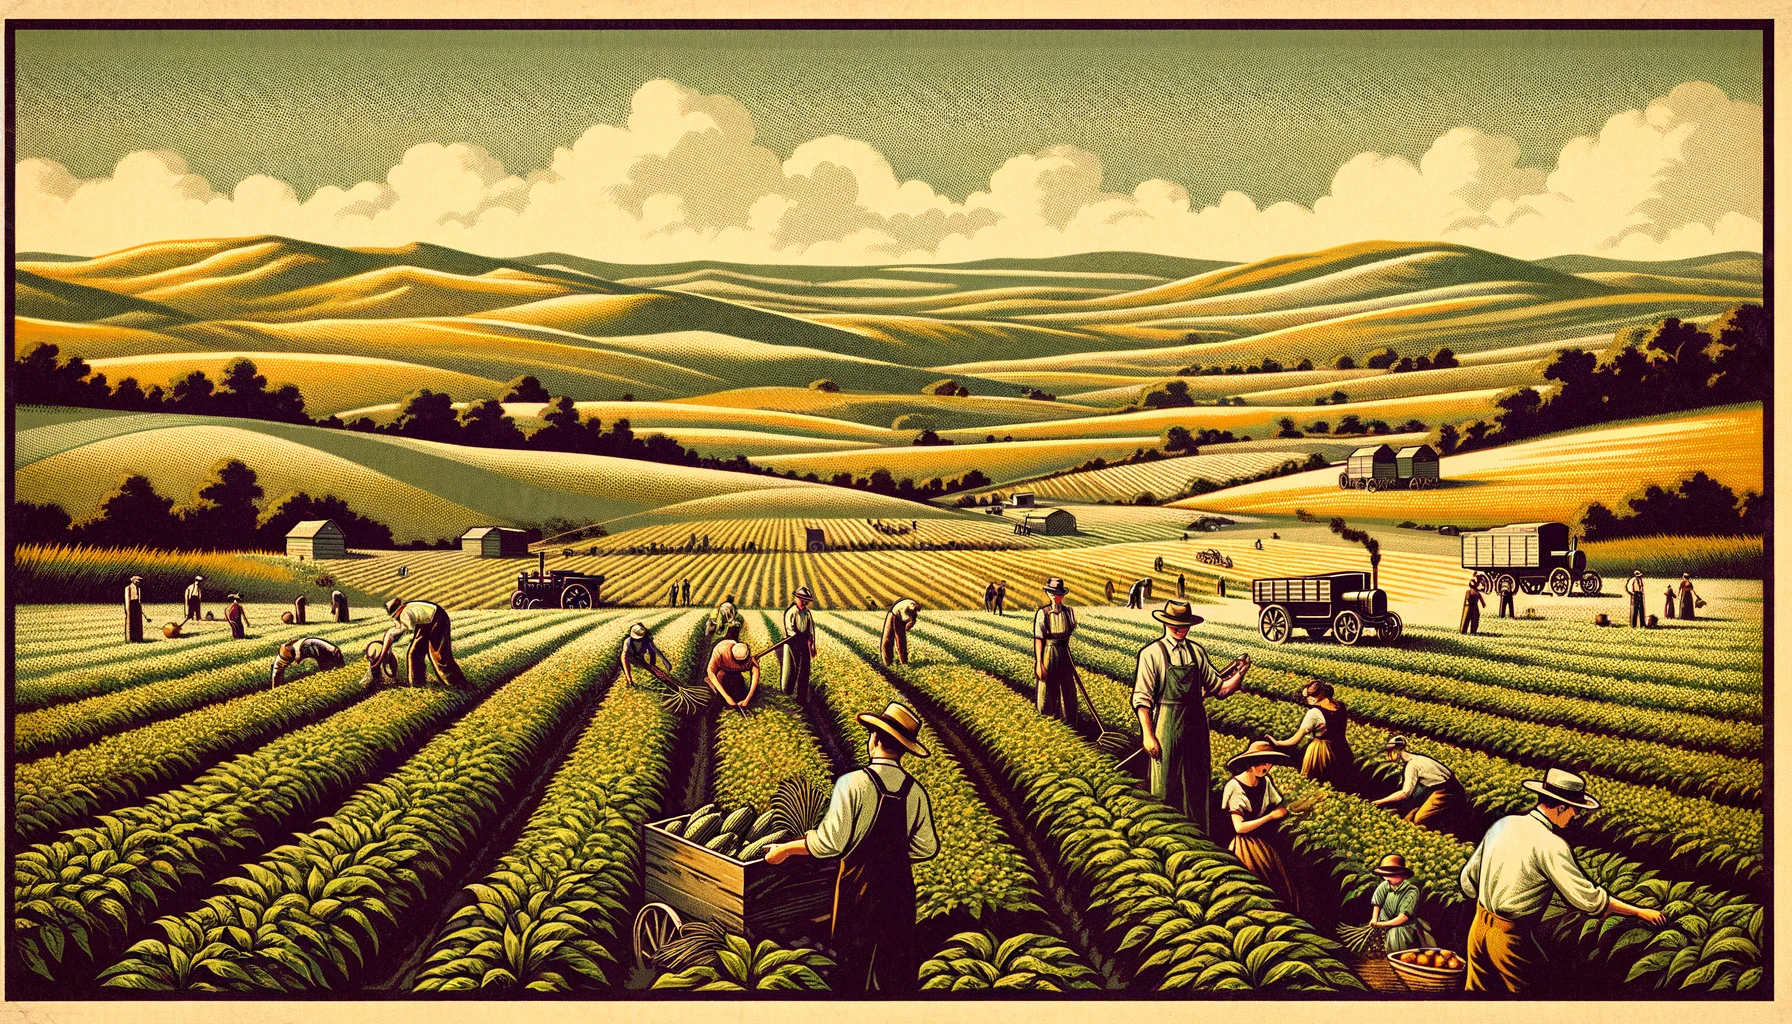 A vintage 1920s-style illustration of Kansas farmland. The scene features expansive fields of crops, with farmers working in the fields. There are rolling hills in the background, a clear sky, and a sense of community with people helping each other with produce. The art captures the essence of rural life in Kansas during the 1920s, with no urban elements or text in the image.